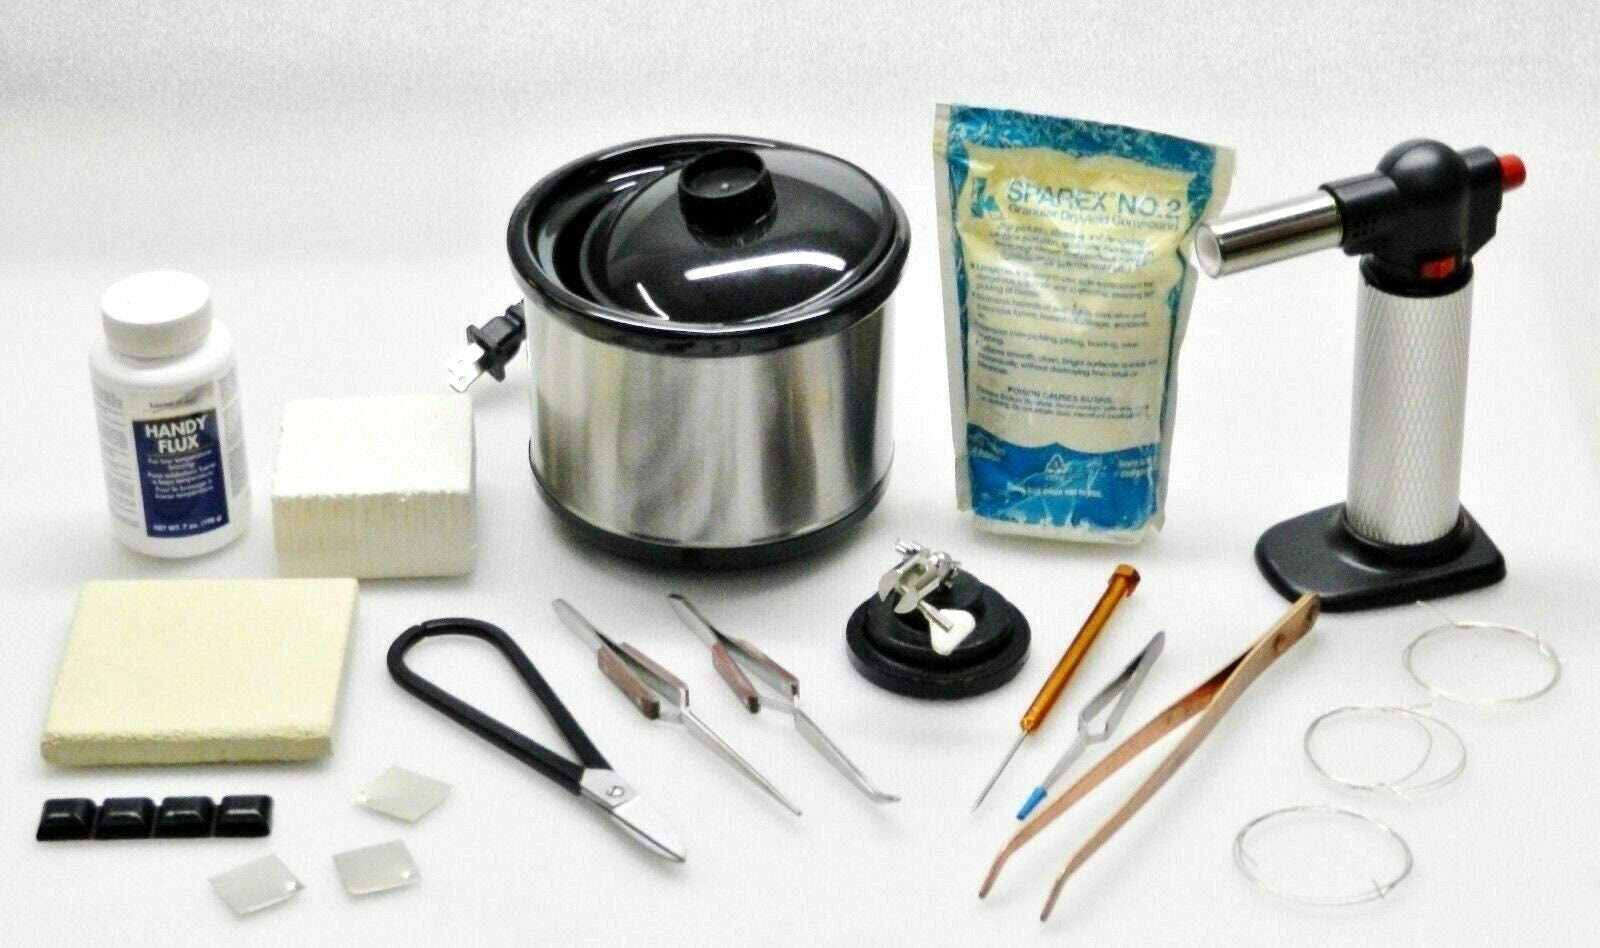 Jewelry Soldering Kit with Pickle Pot, 10 Oz Sparex Compound, & Copper  Tongs, KIT-0132